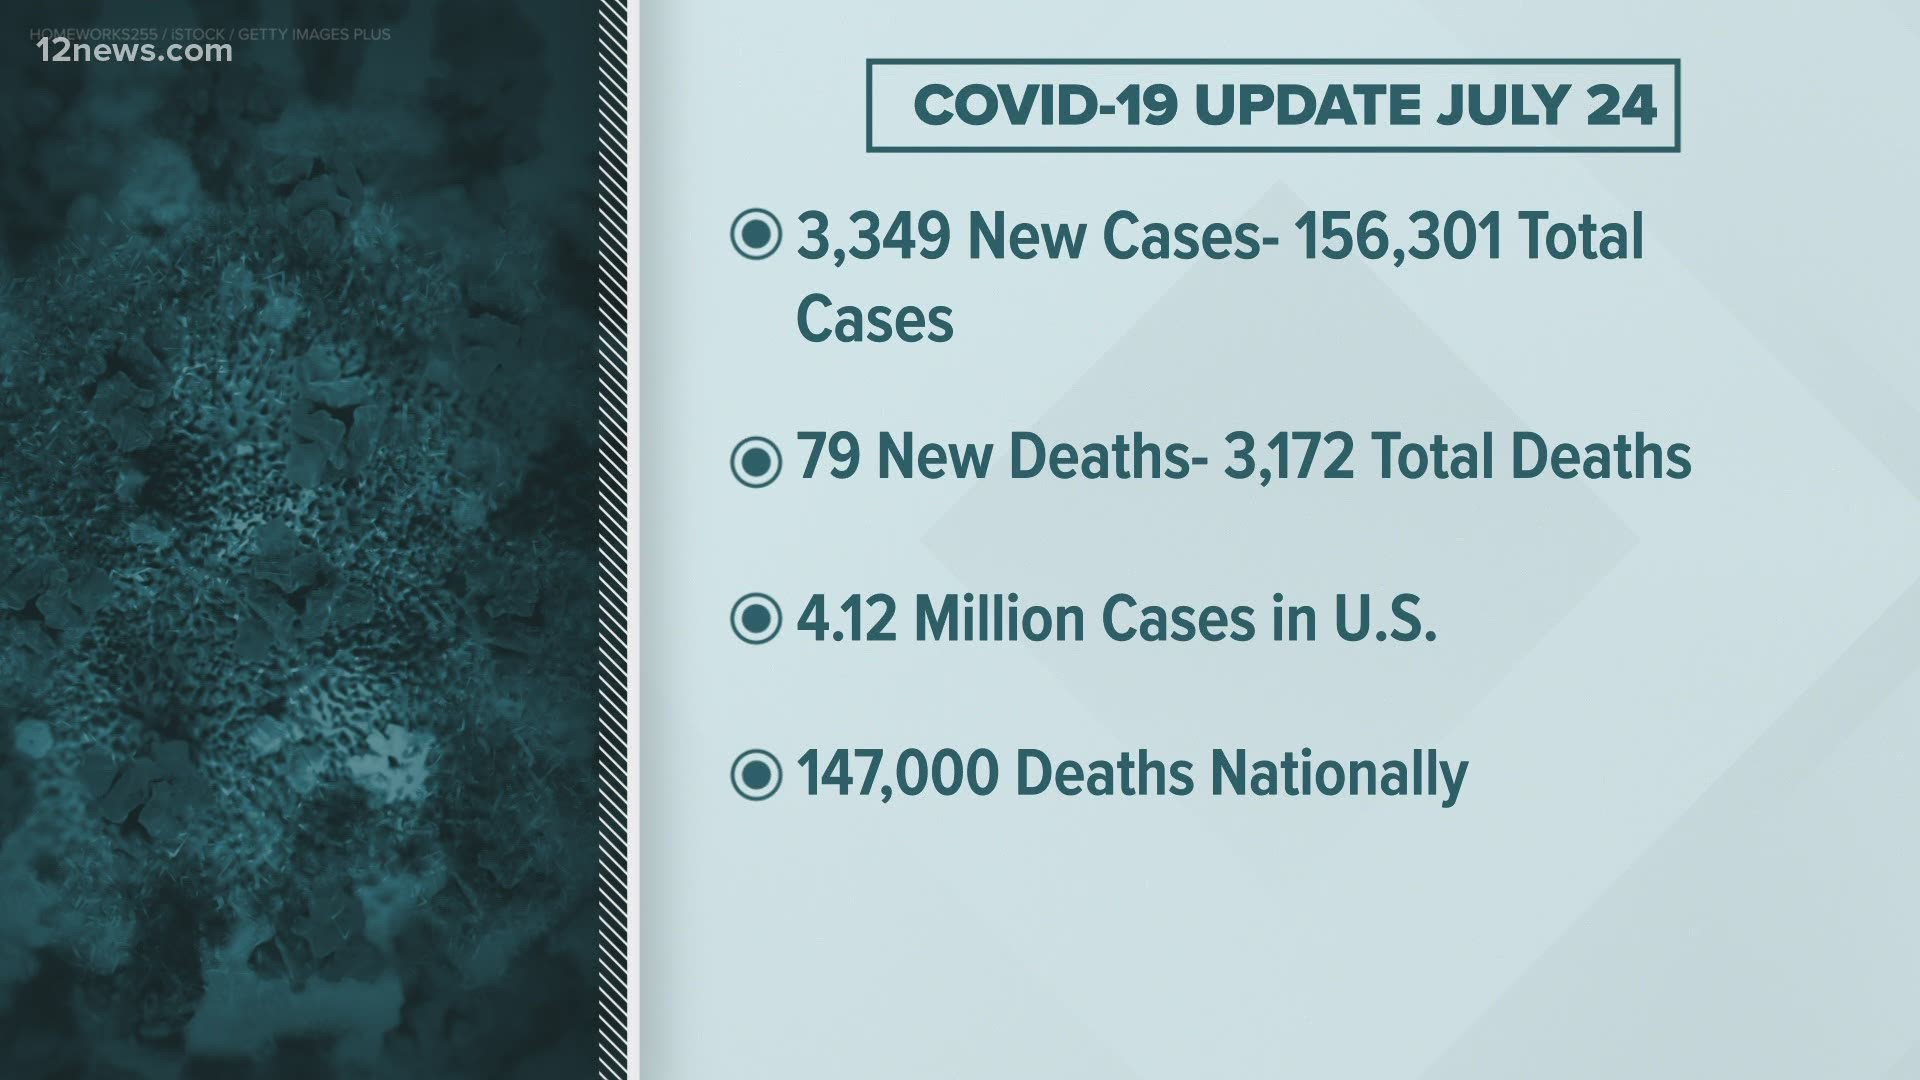 COVID-19 cases in Arizona continue to grow. Here's the latest coronavirus in Arizona update for July 24.